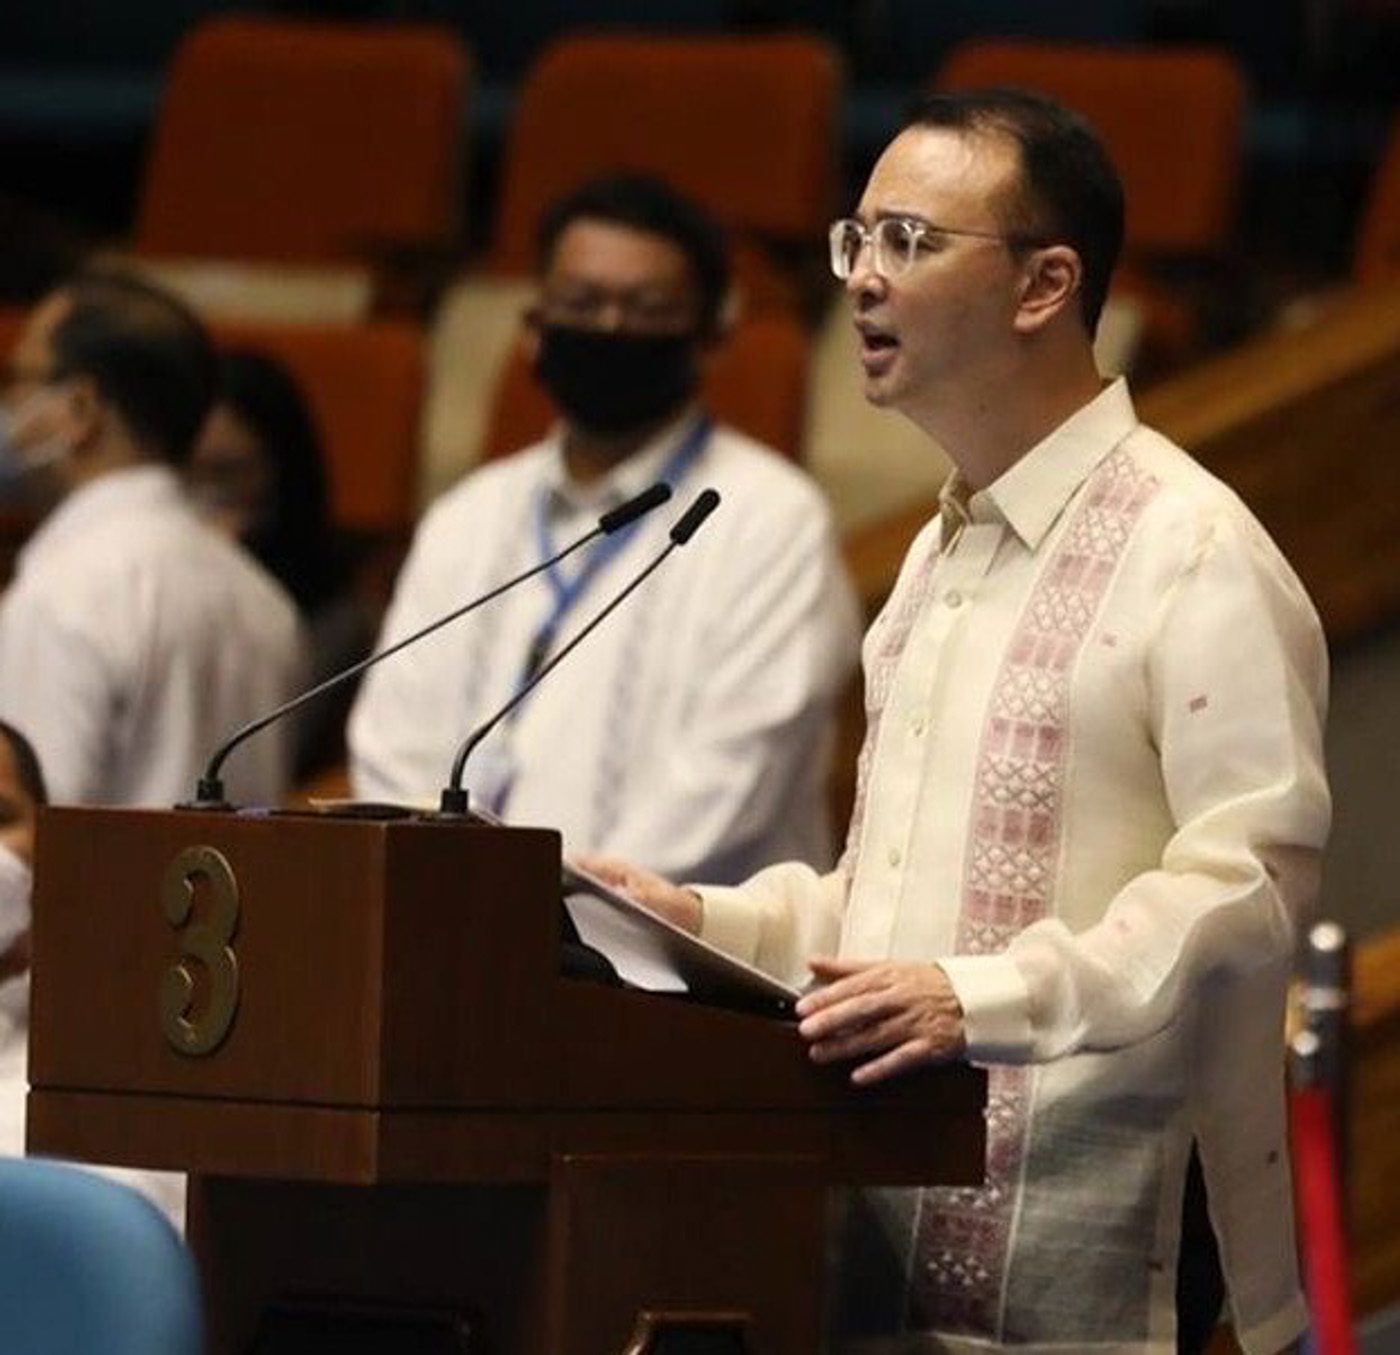 BEEF VS ABS-CBN. House Speaker Alan Peter Cayetano doesn’t attend the July 6, 2020, hearing on the franchise application of broadcast network ABS-CBN, which he has accused of bias in its 2016 presidential campaign coverage. File photo courtesy of PPAB 